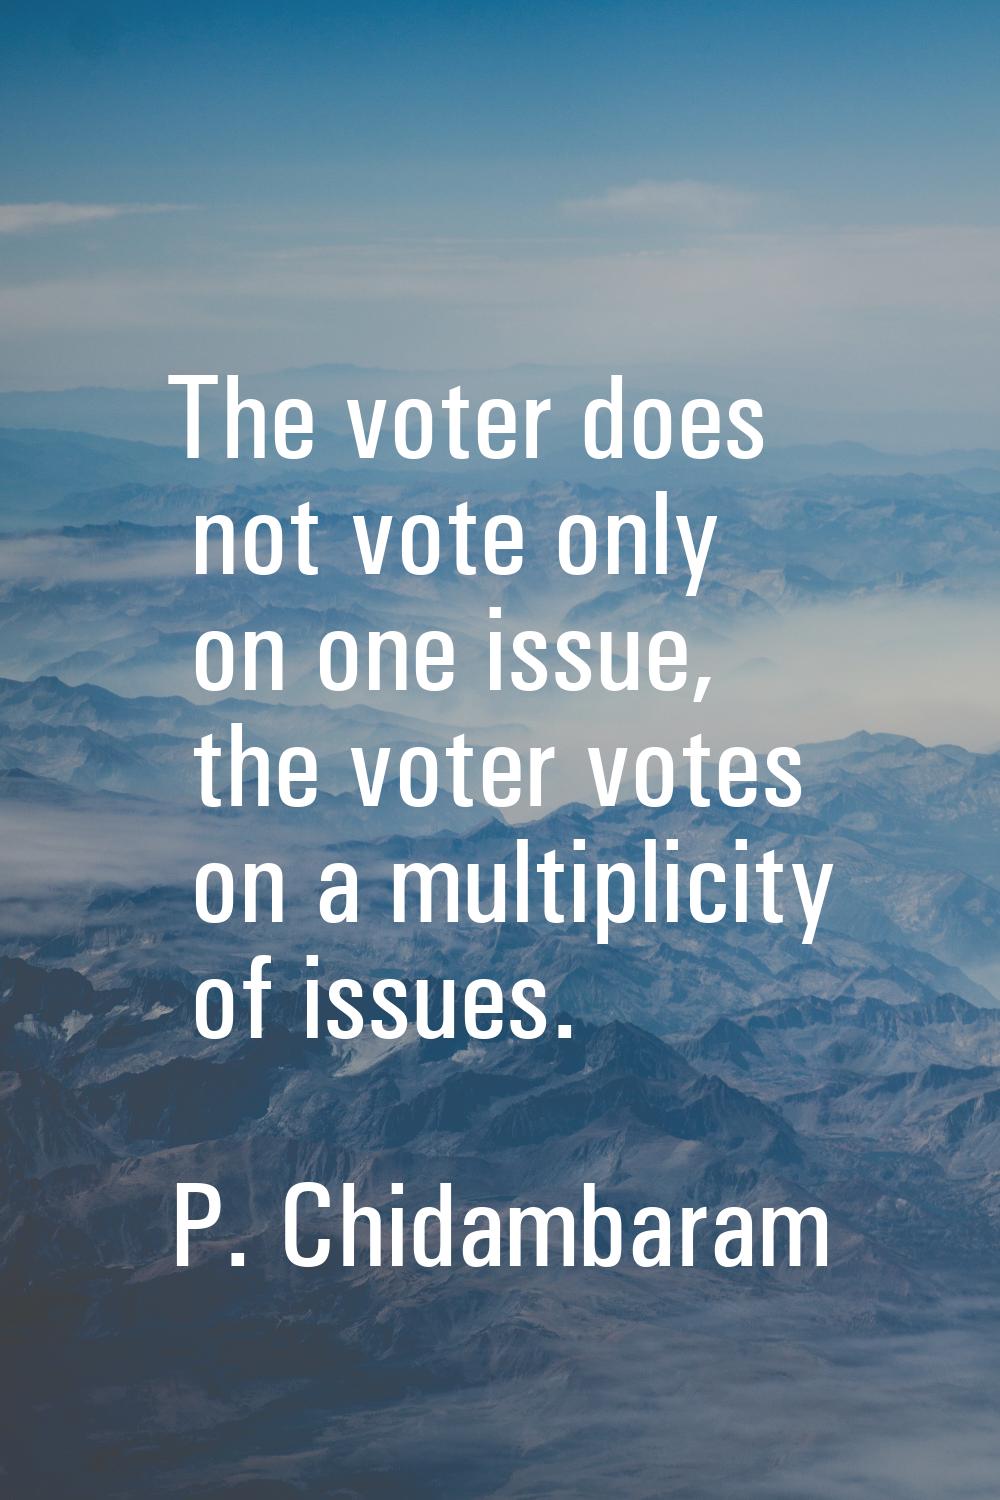 The voter does not vote only on one issue, the voter votes on a multiplicity of issues.